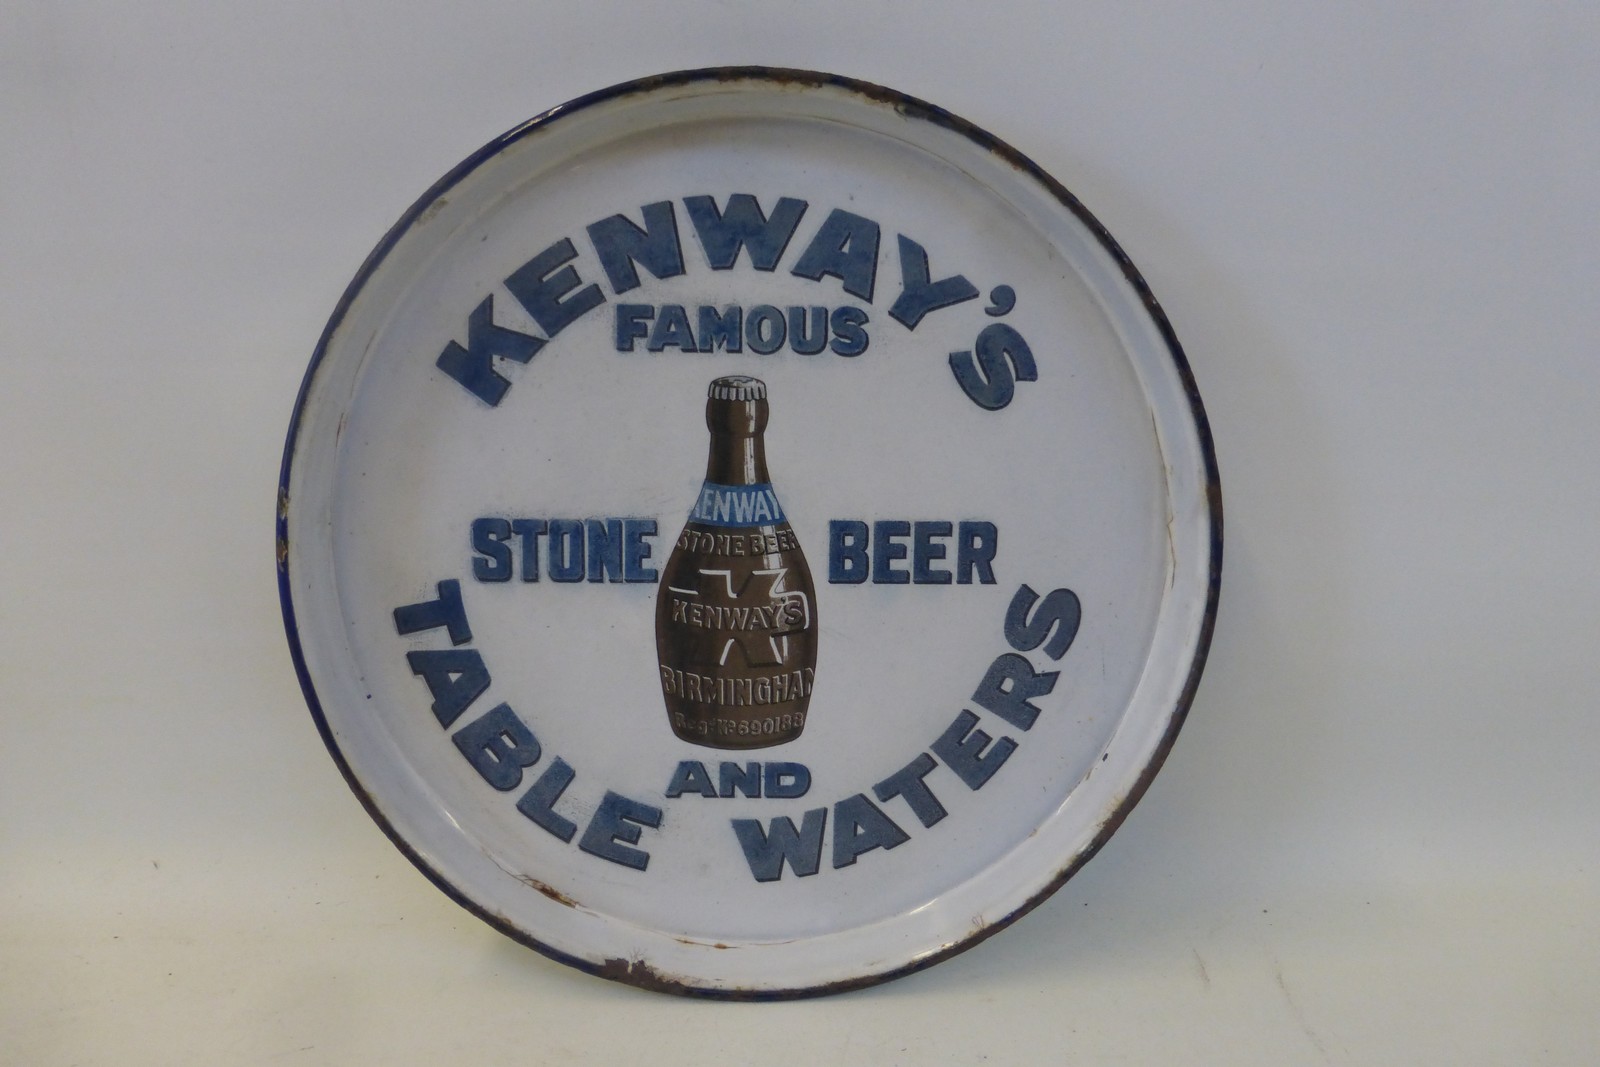 A Kenway's Famous Stone Beer Table Waters part pictorial enamel circular tray, 11 1/2" diameter.